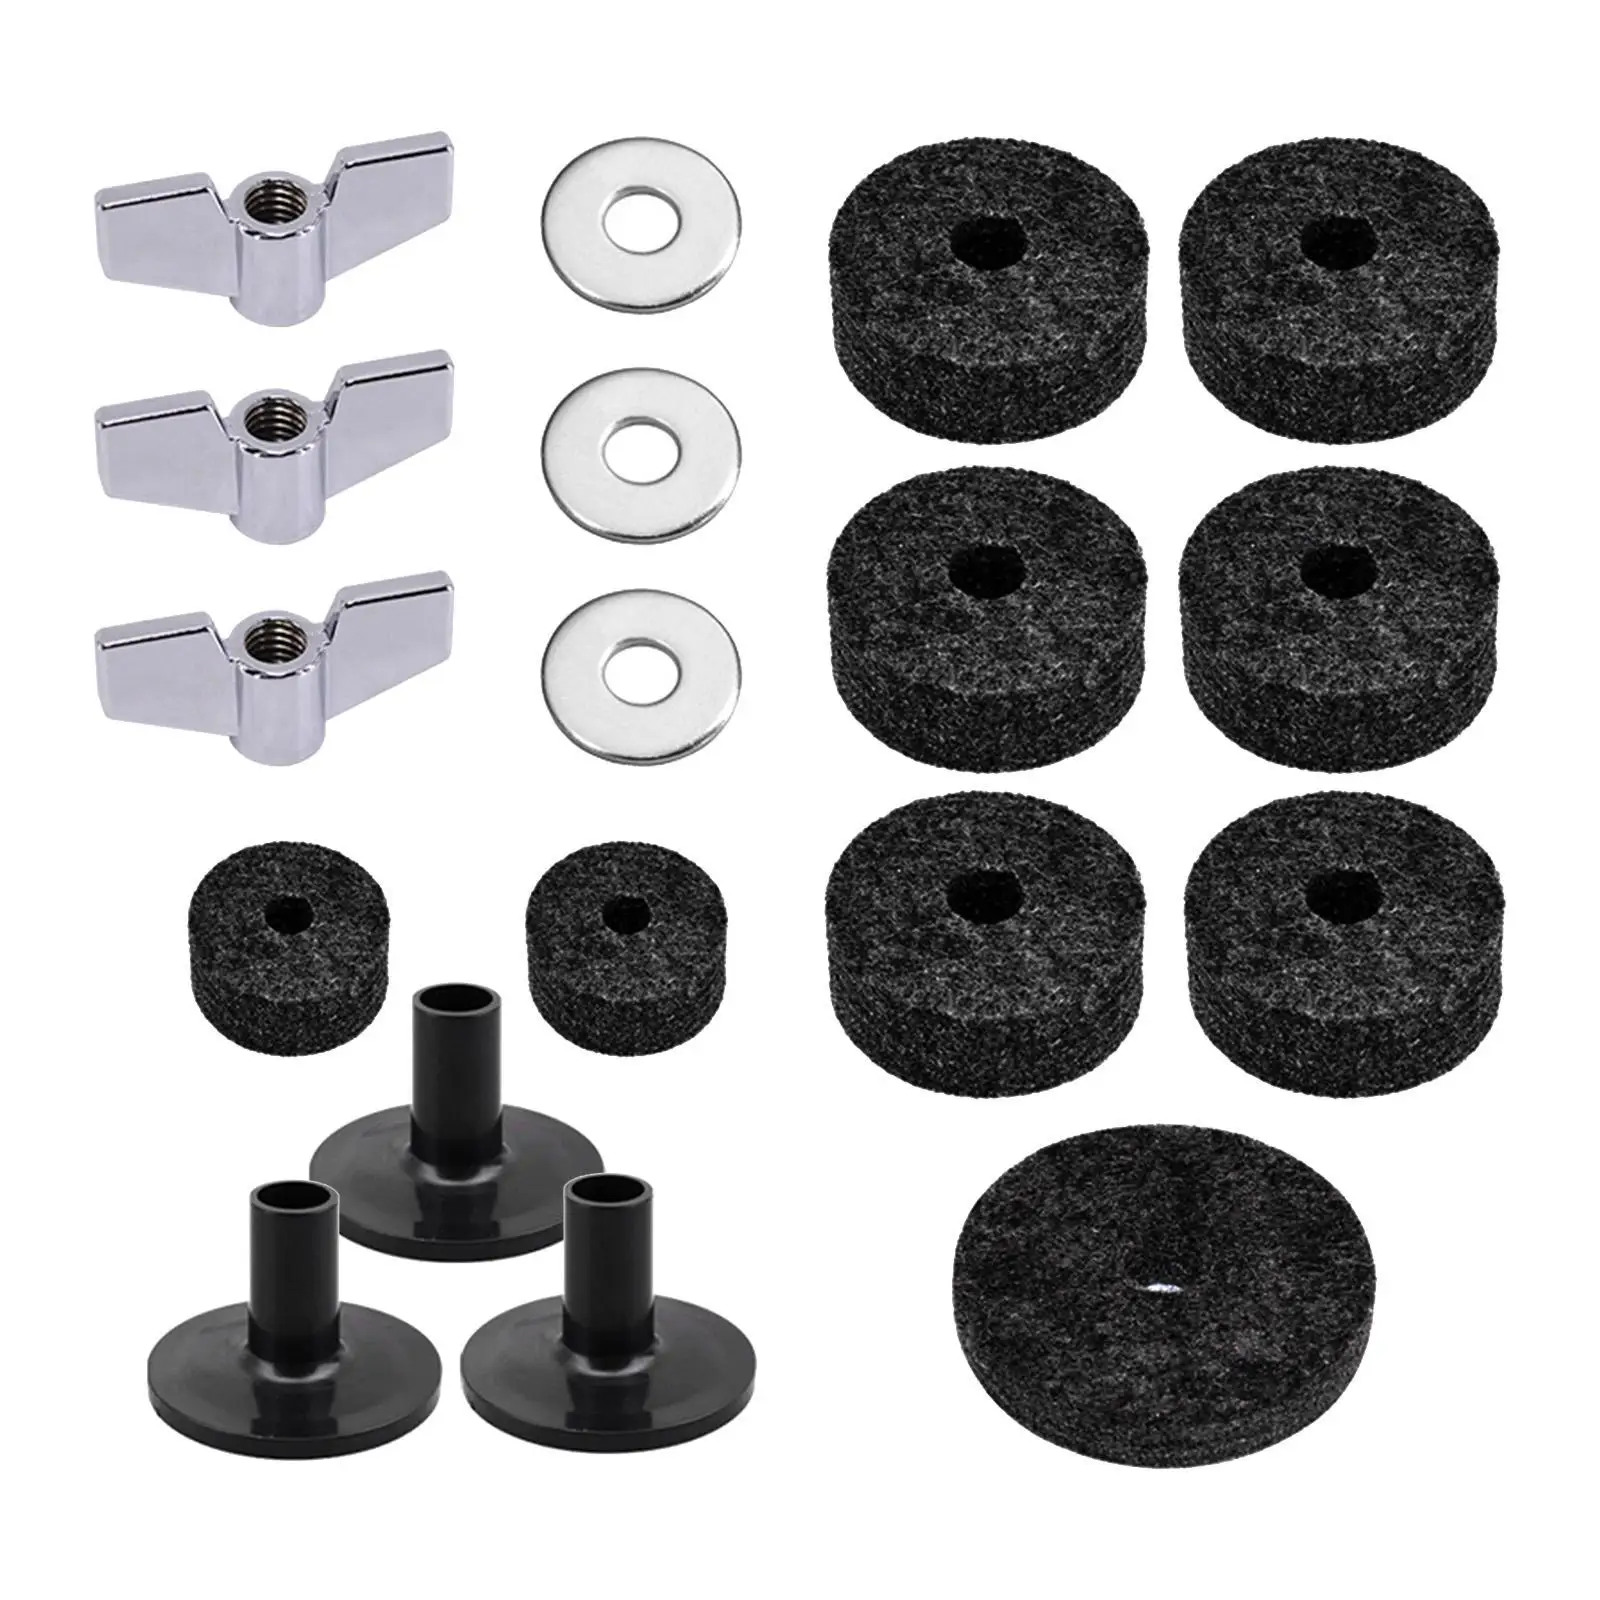 Replacement Cymbal Felts Washers Cymbal Washer, Wing Nuts, Equipment for Performer